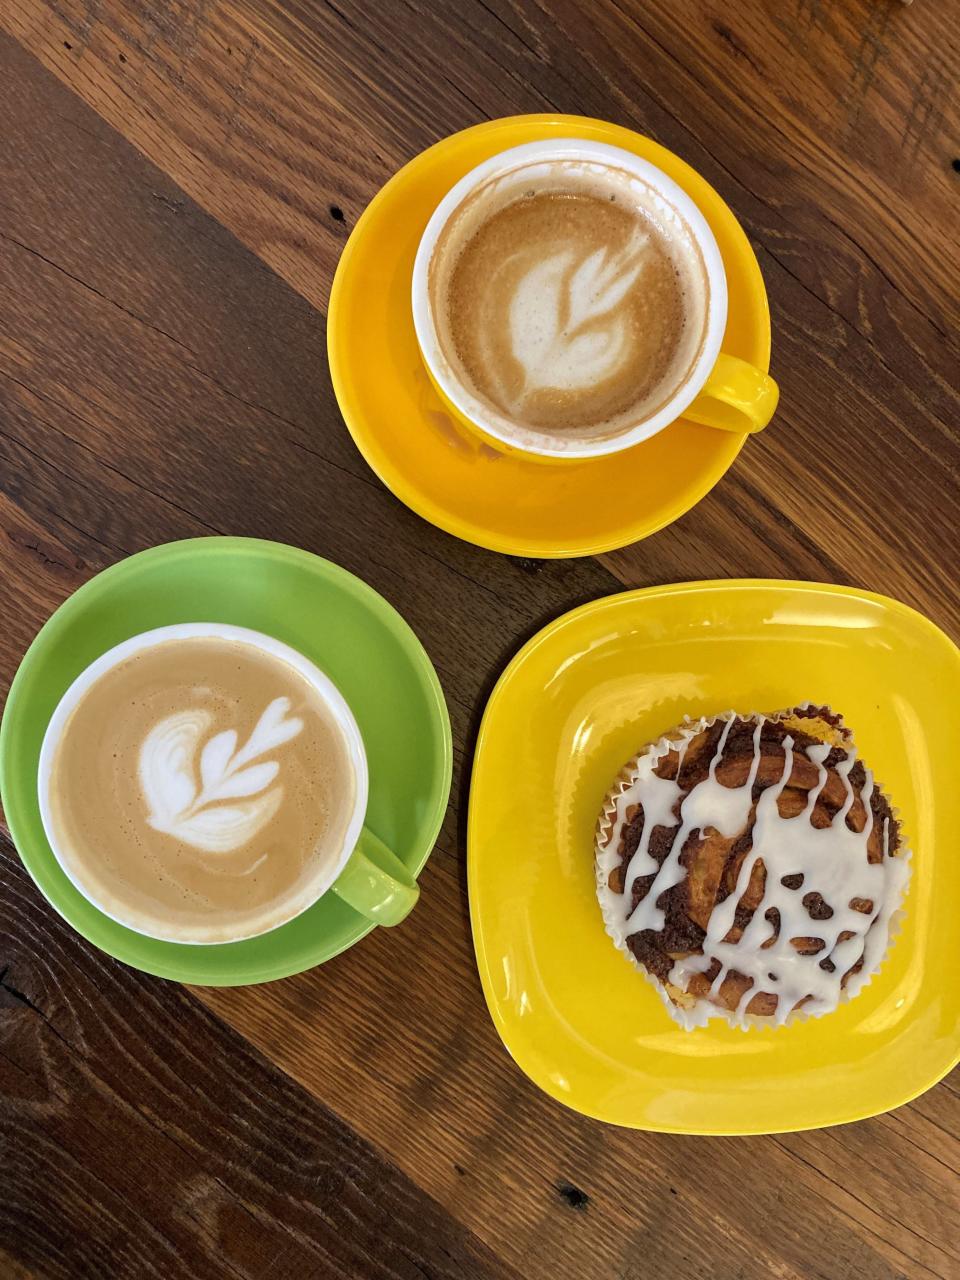 Coffee and a cinnamon roll from The Pamplemousse Project, a new coffee shop in White Plains which donates profits to local charities. Photographed Dec. 2, 2022